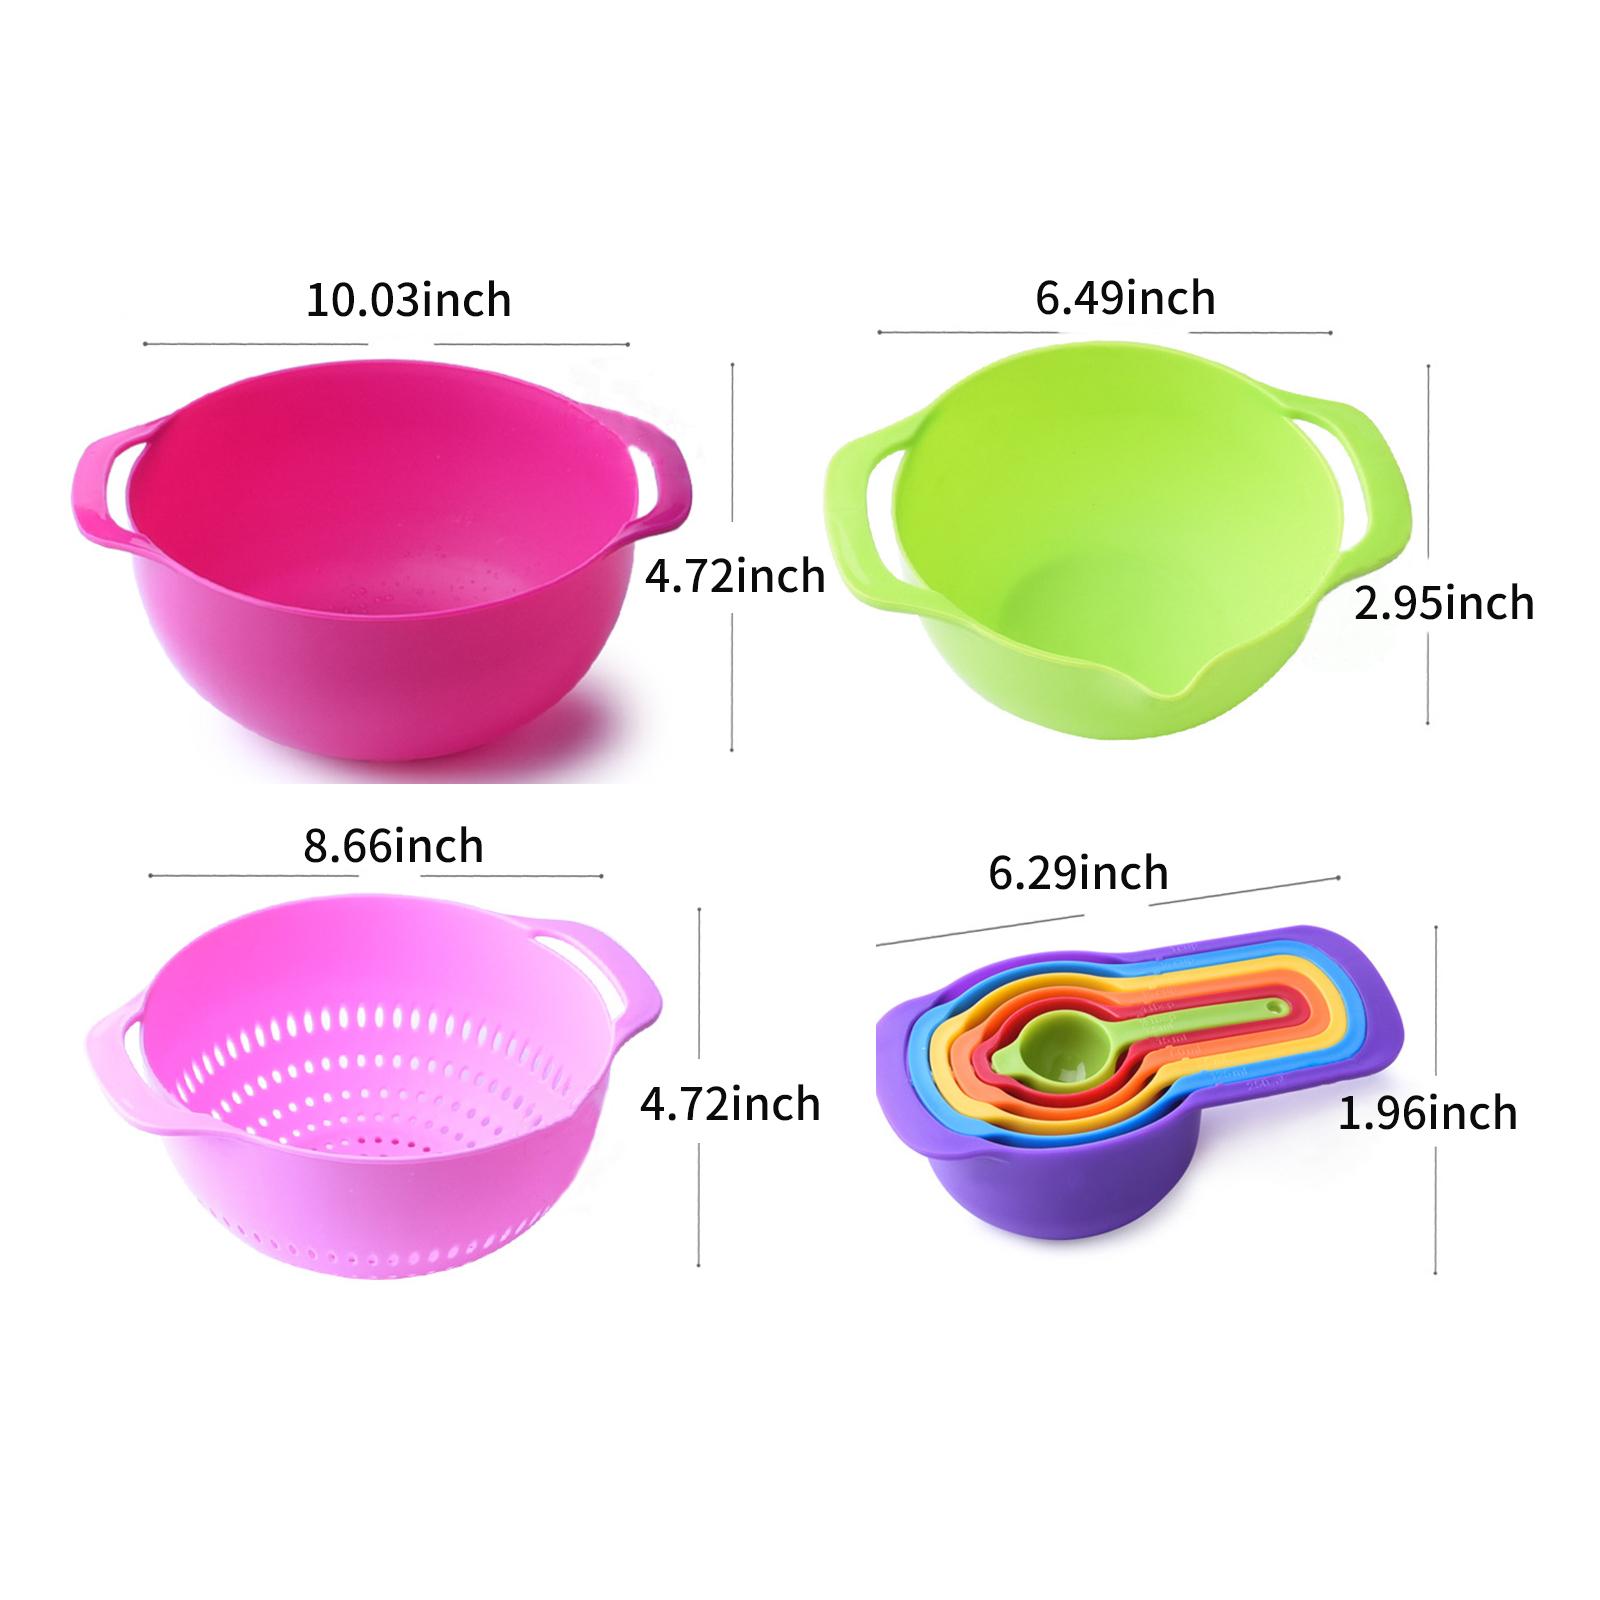 10PCS Mixing Bowl Set Measuring Spoon Set Coloful Sieve Colander Strainer Bowl Salad Bowl With Handle for Kitchen Baking